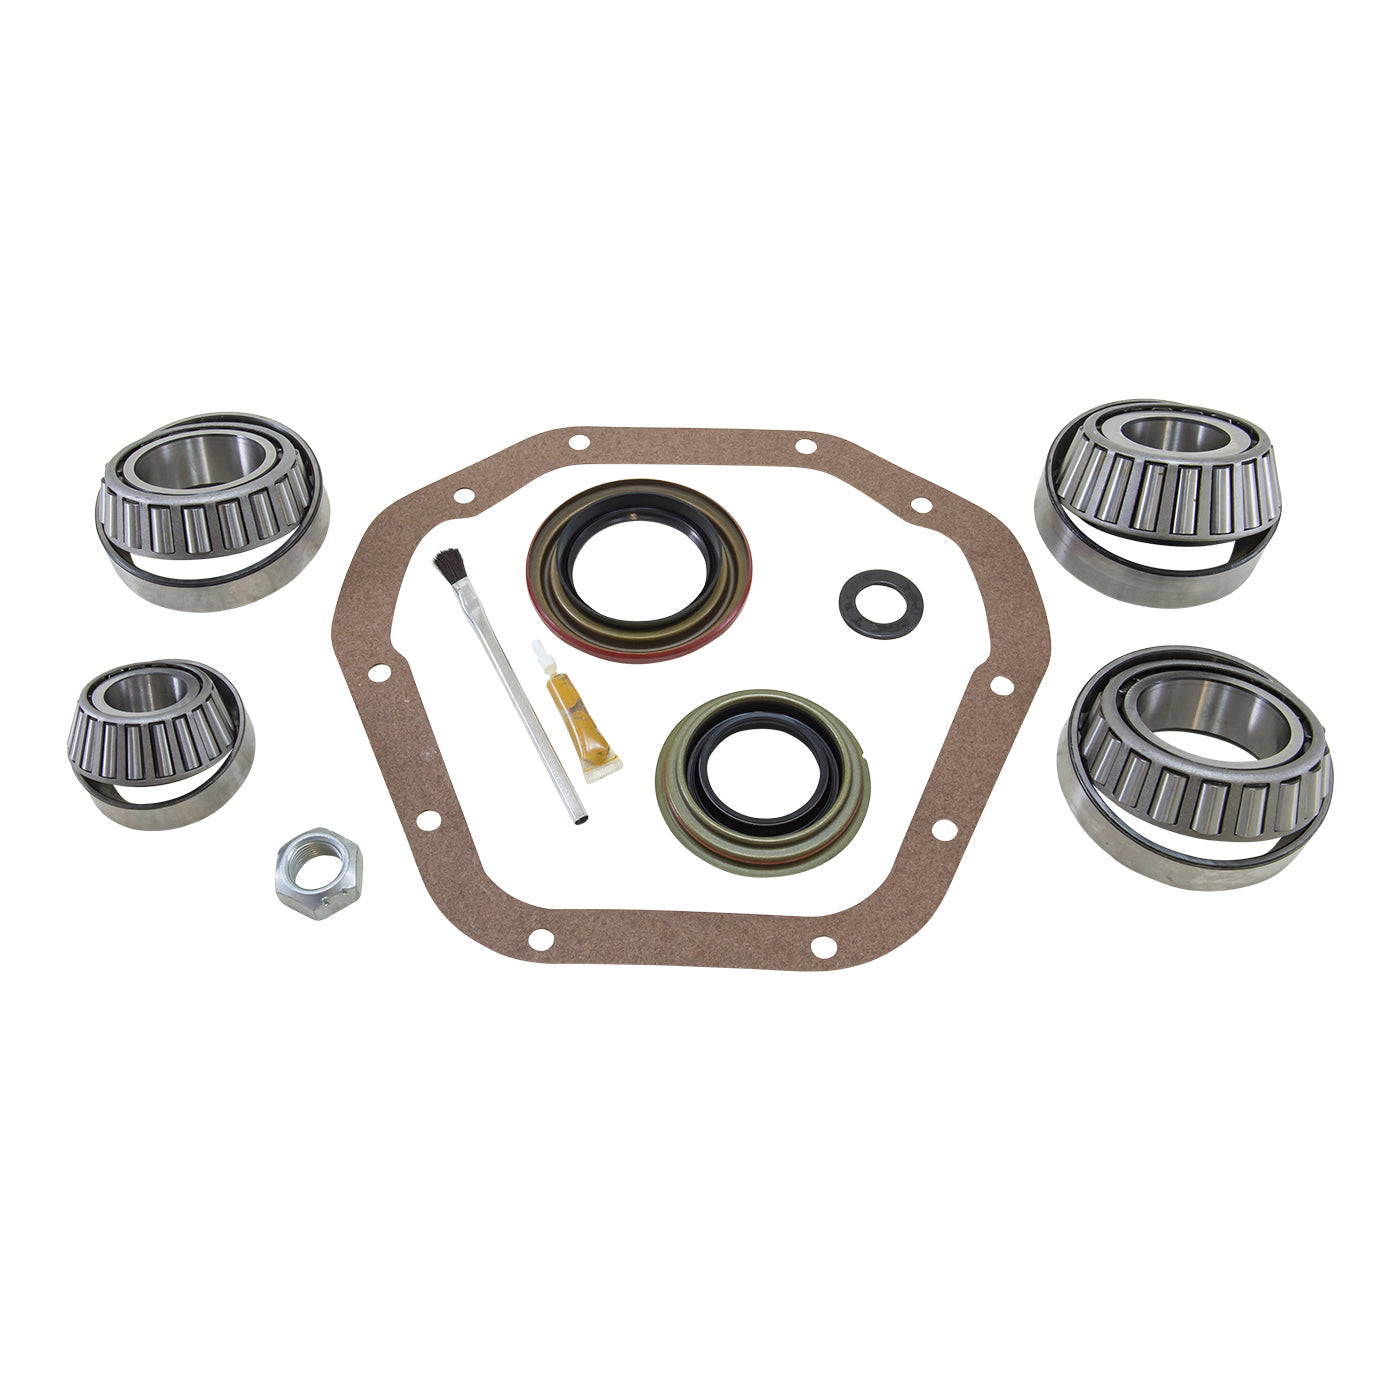 Yukon Gear Bearing install kit for Dana 80 (4.125" OD only) differential BK D80-A